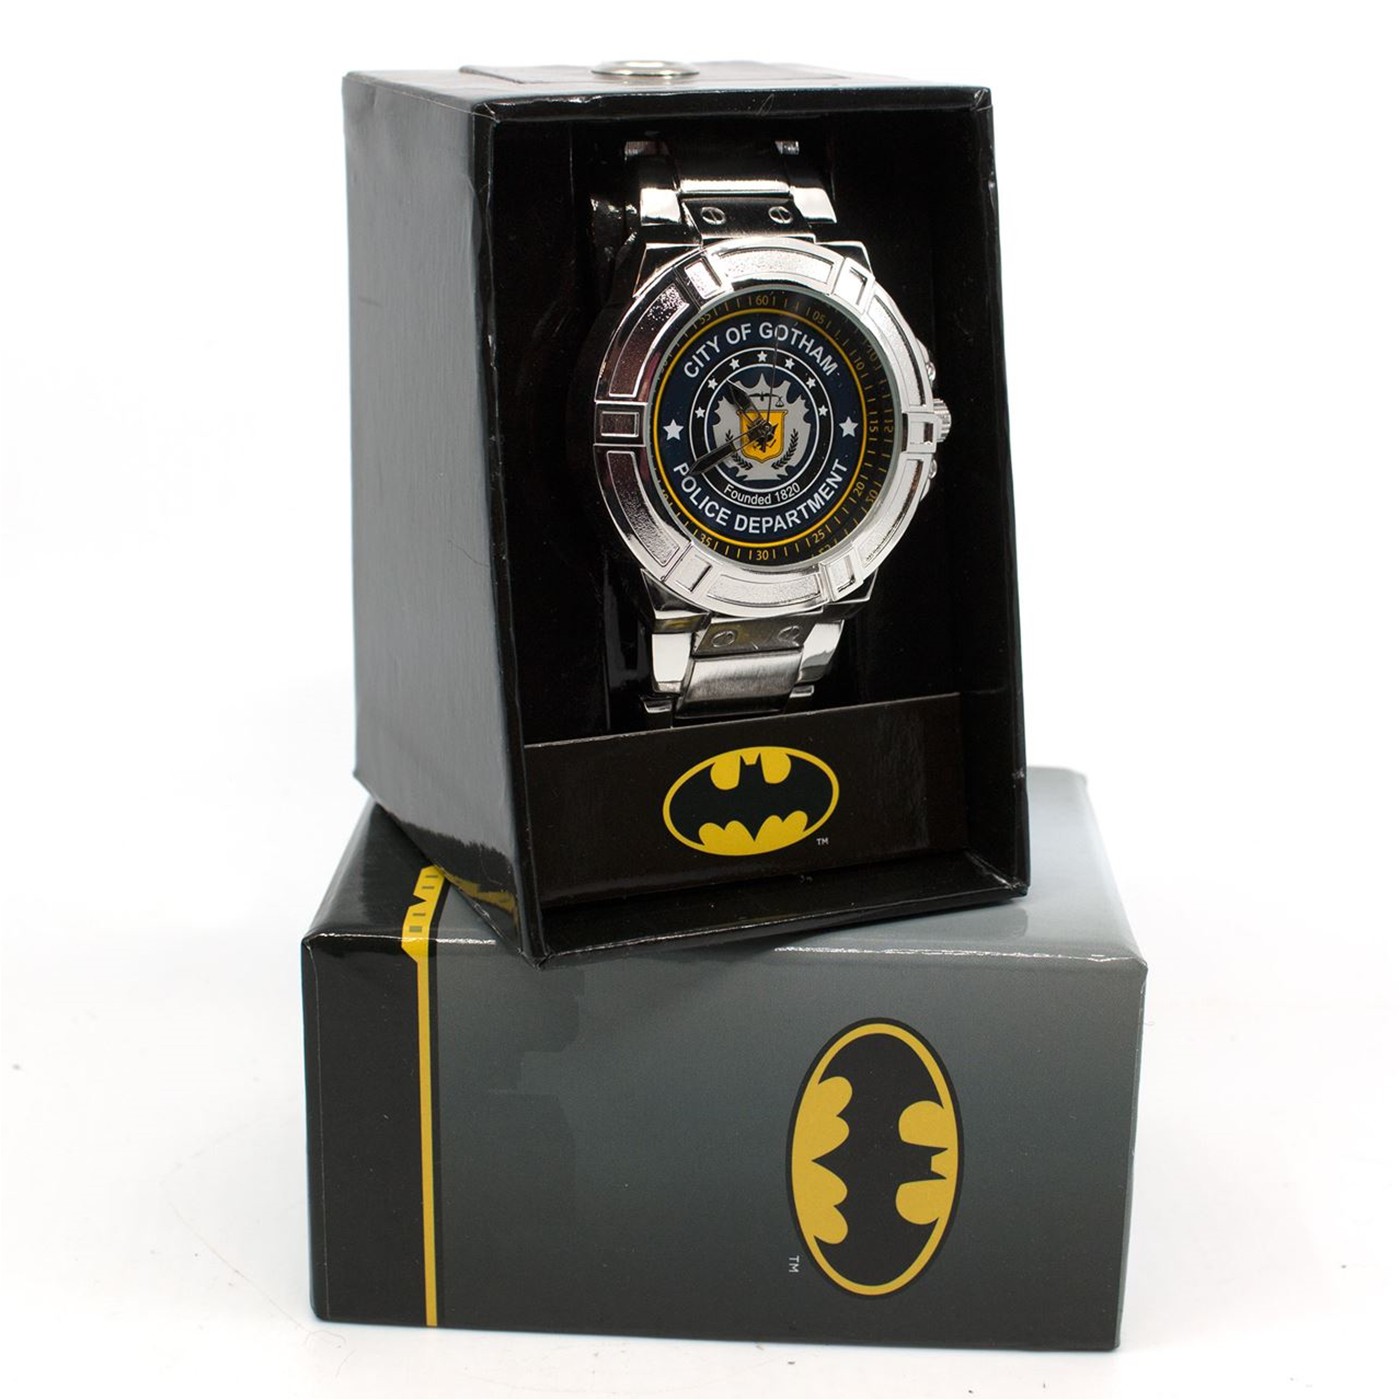 Batman GCPD Watch with Metal Band